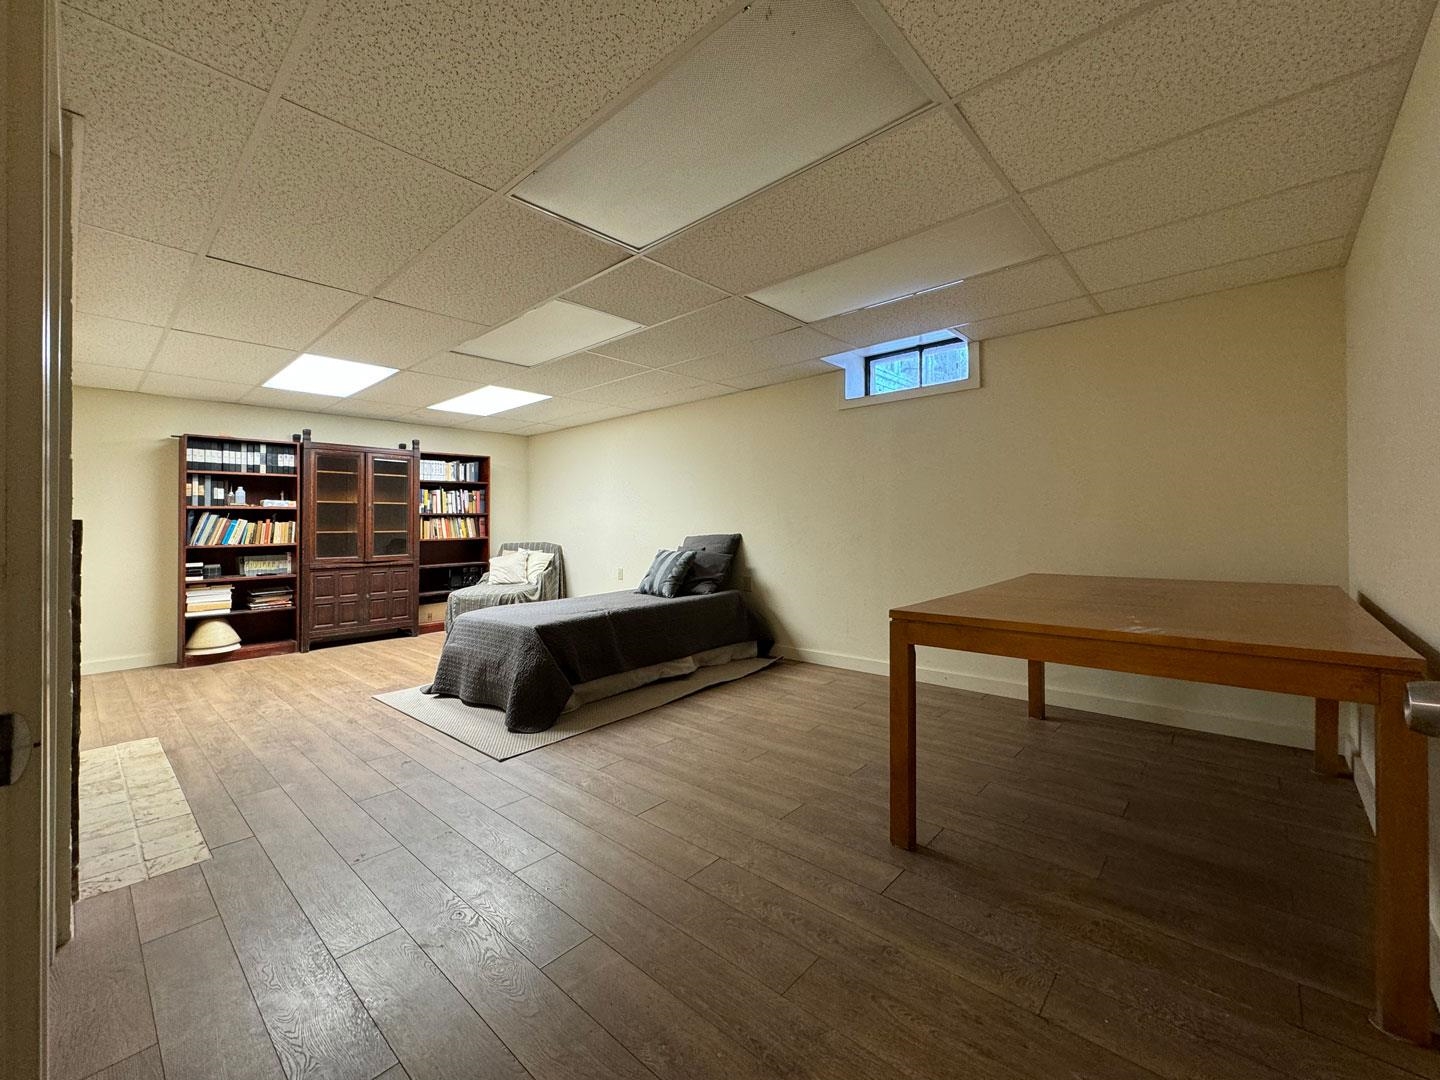 newly finished basement room for office or playroom.